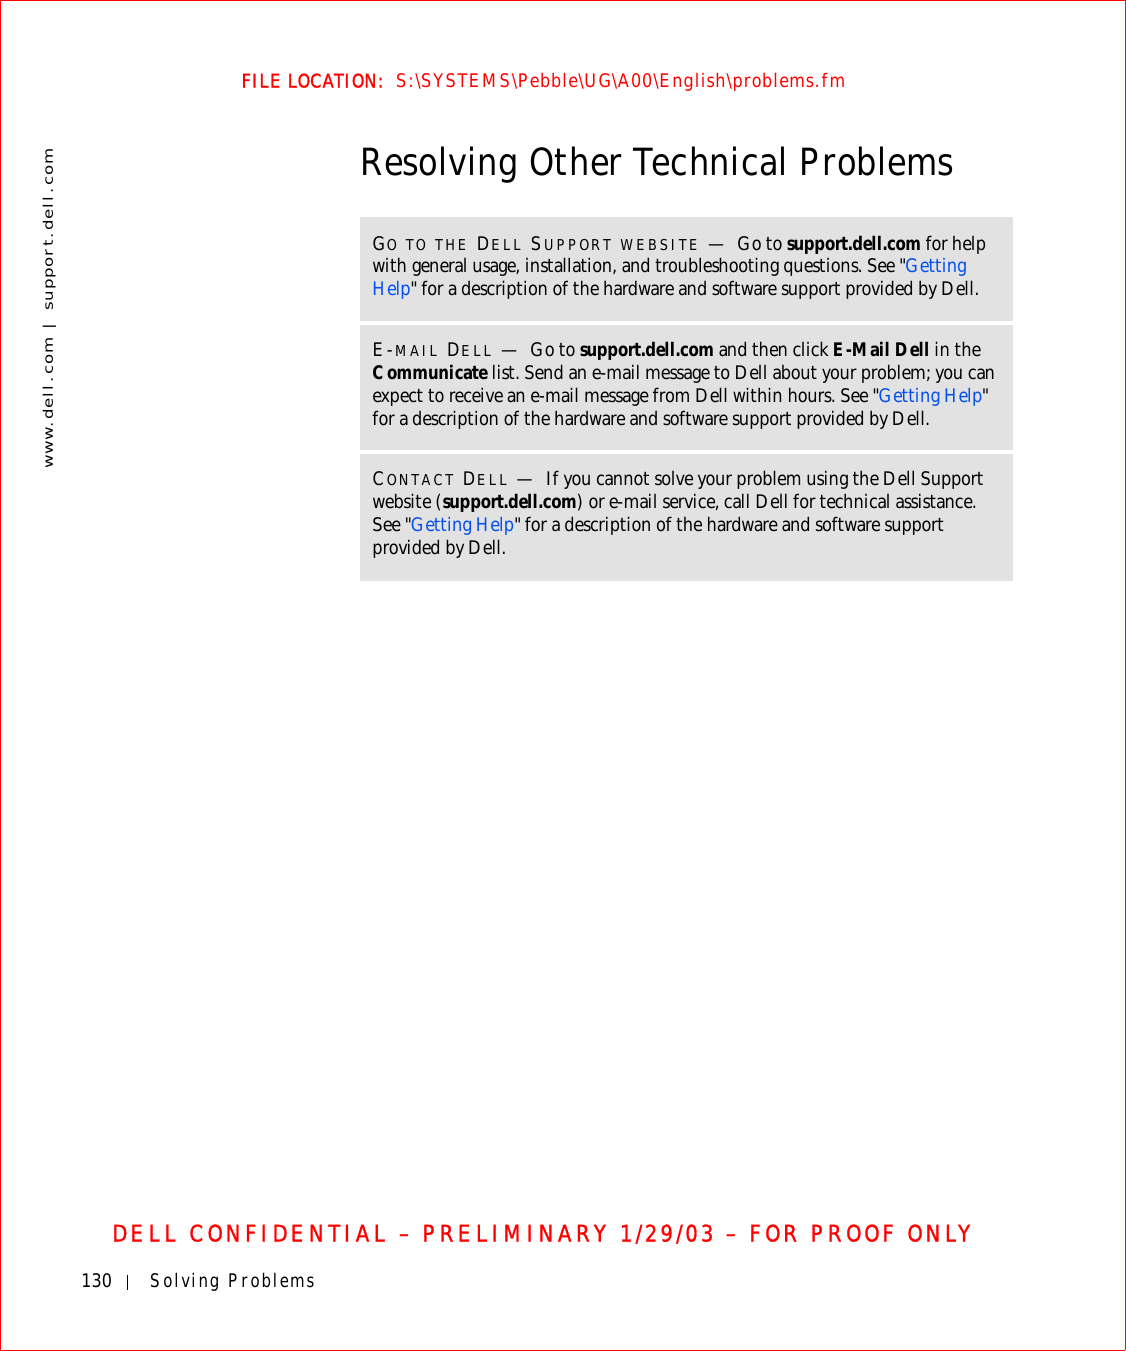 130 Solving Problemswww.dell.com | support.dell.comFILE LOCATION:  S:\SYSTEMS\Pebble\UG\A00\English\problems.fmDELL CONFIDENTIAL – PRELIMINARY 1/29/03 – FOR PROOF ONLYResolving Other Technical ProblemsGO TO THE DELL SUPPORT WEBSITE —Go to support.dell.com for help with general usage, installation, and troubleshooting questions. See &quot;Getting Help&quot; for a description of the hardware and software support provided by Dell.E-MAIL DELL —Go to support.dell.com and then click E-Mail Dell in the Communicate list. Send an e-mail message to Dell about your problem; you can expect to receive an e-mail message from Dell within hours. See &quot;Getting Help&quot; for a description of the hardware and software support provided by Dell.CONTACT DELL —If you cannot solve your problem using the Dell Support website (support.dell.com) or e-mail service, call Dell for technical assistance. See &quot;Getting Help&quot; for a description of the hardware and software support provided by Dell.